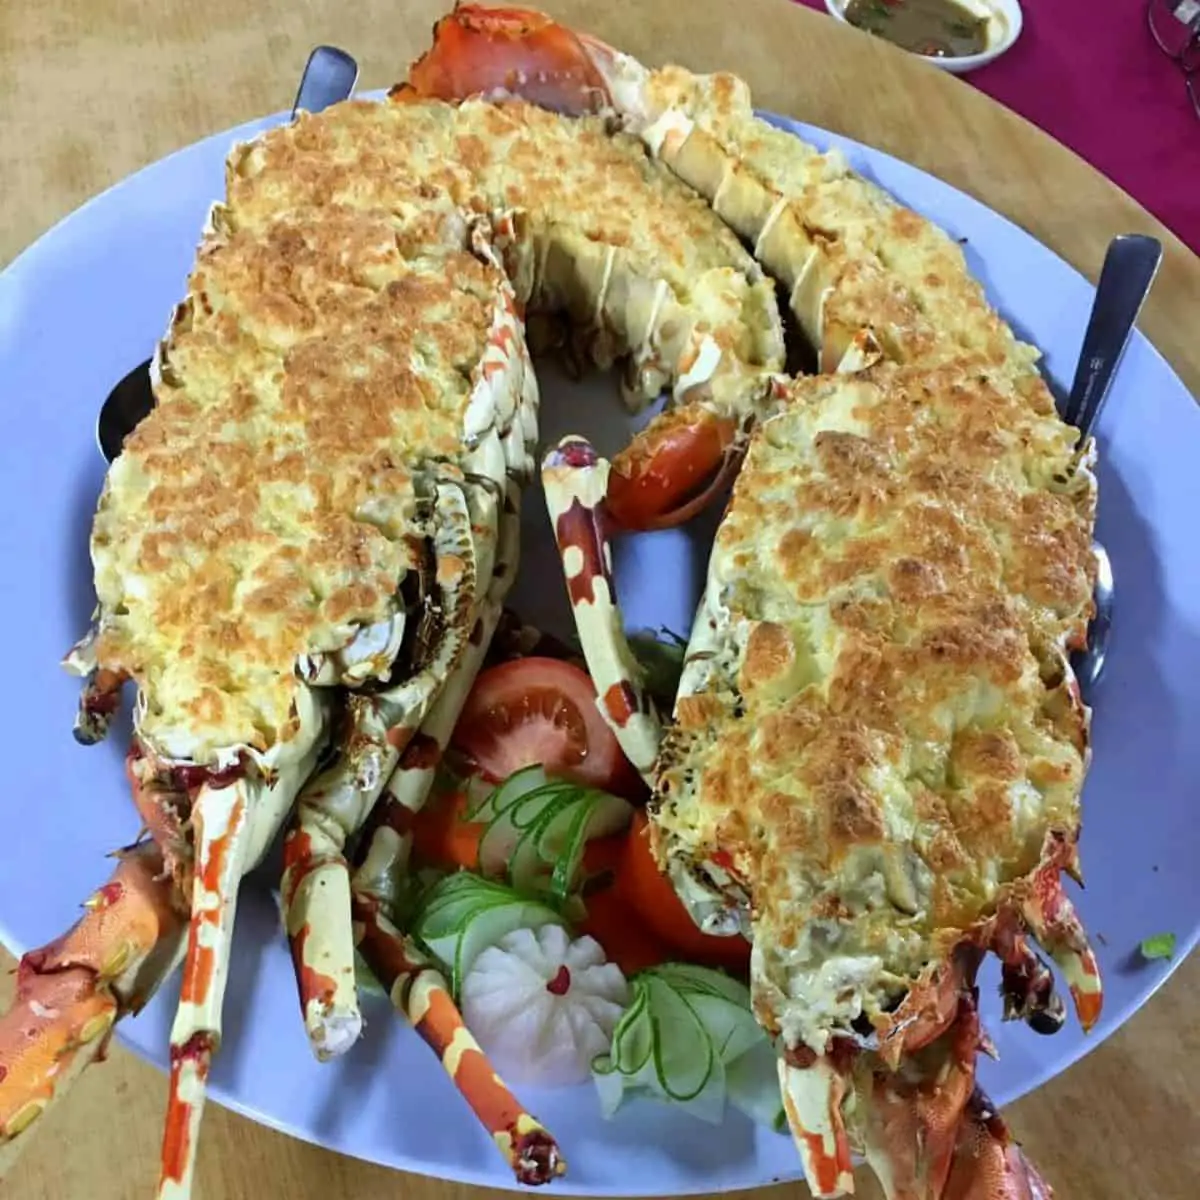 Lobster covered with a tasty batter